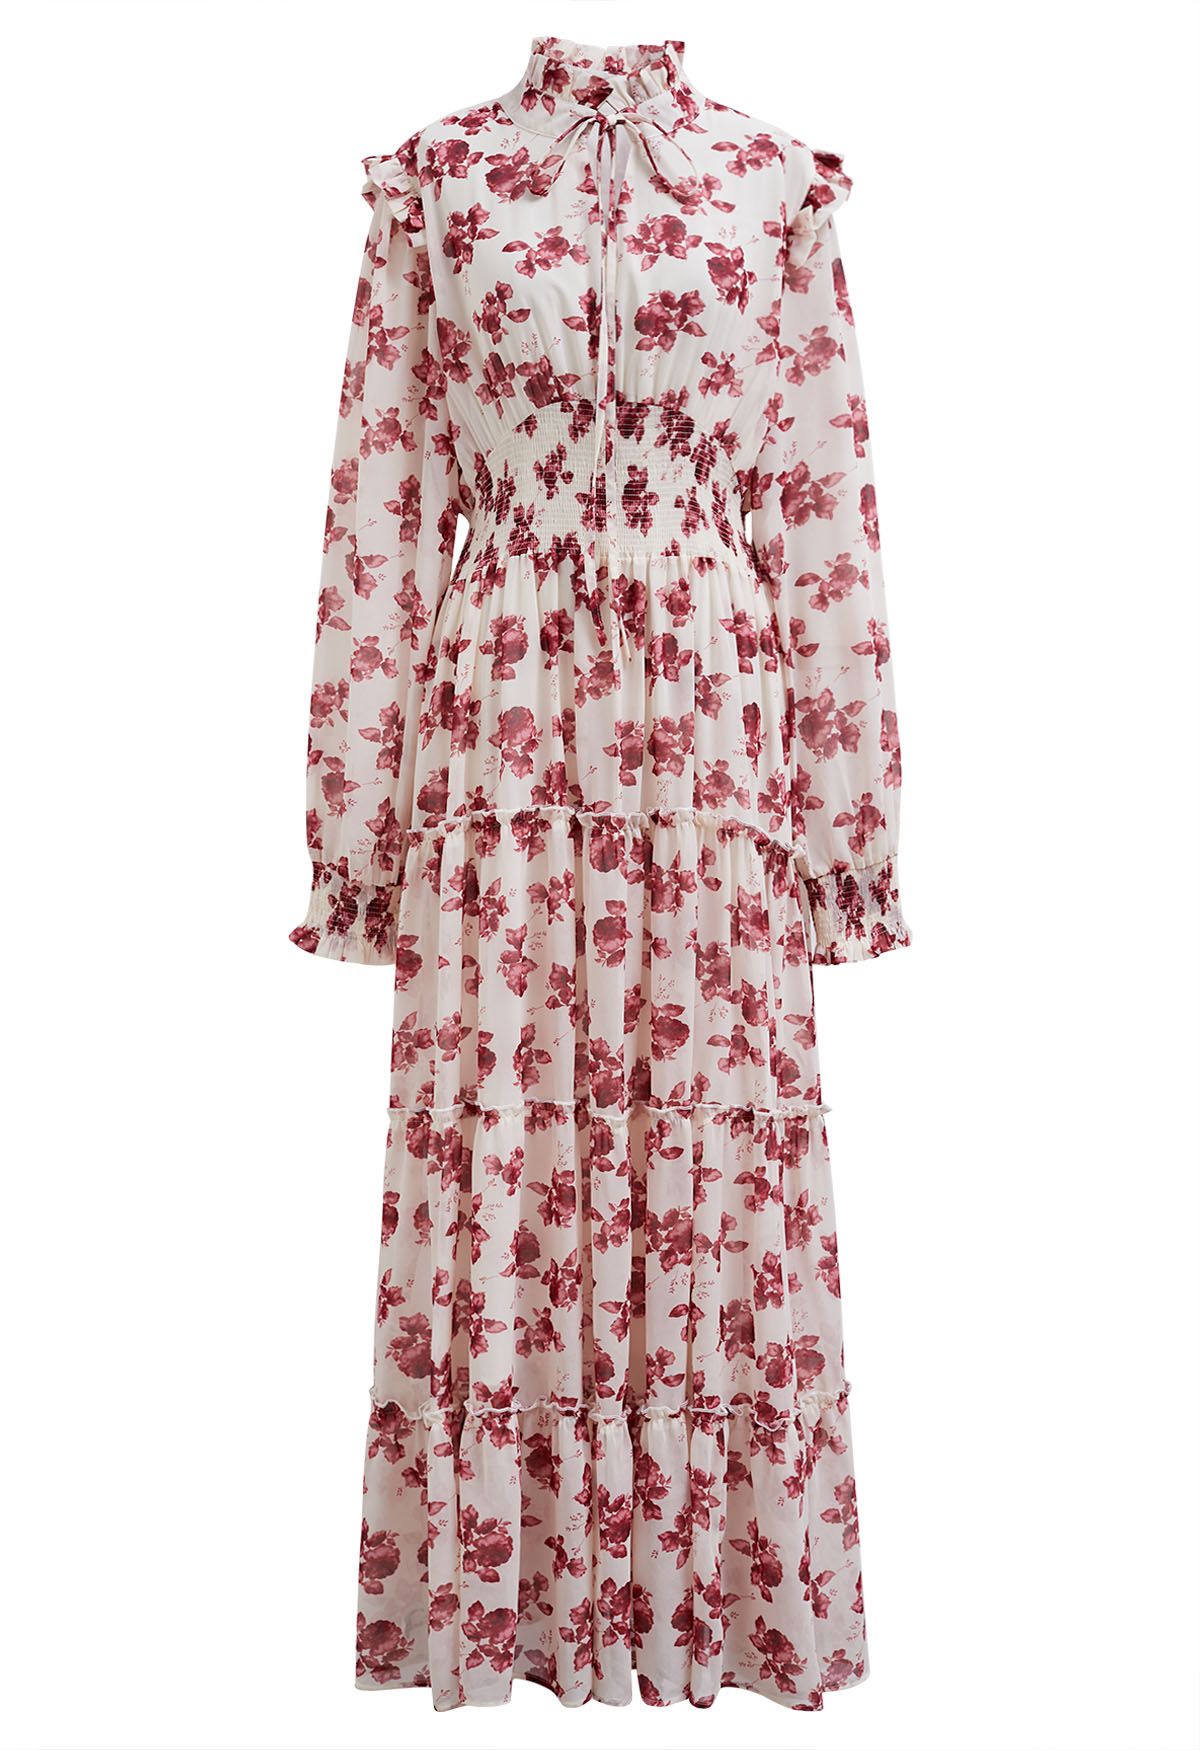 Darling Red Floral Tie Neck Maxi Dress